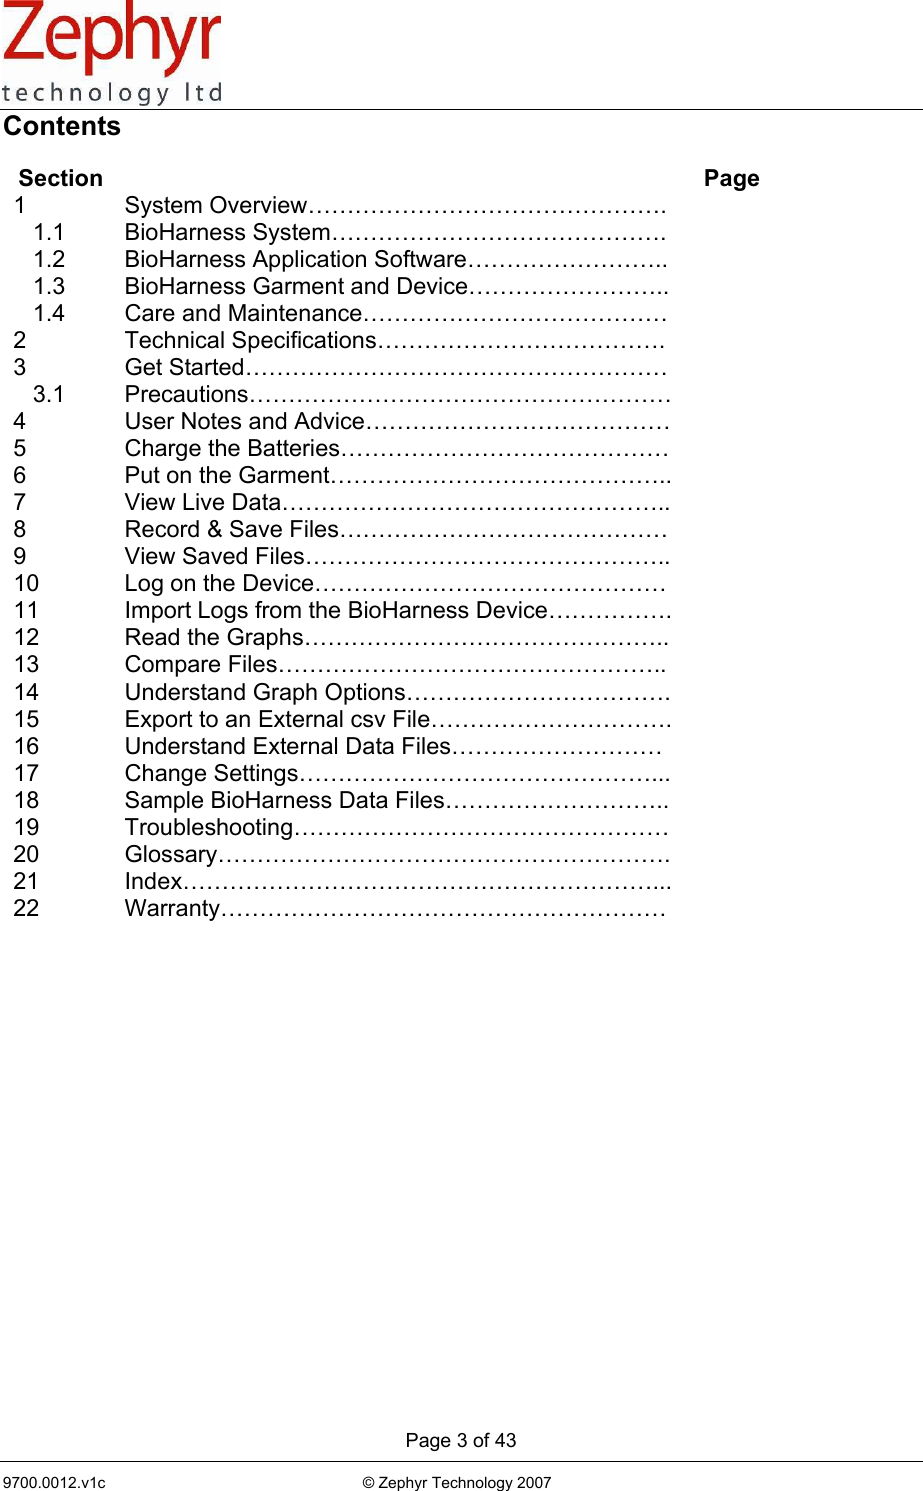      Page 3 of 43 9700.0012.v1c                                                           © Zephyr Technology 2007                                                            Contents  Section   Page 1 System Overview……………………………………….     1.1  BioHarness System…………………………………….      1.2  BioHarness Application Software……………………..      1.3  BioHarness Garment and Device……………………..      1.4  Care and Maintenance…………………………………   2 Technical Specifications……………………………….  3 Get Started………………………………………………     3.1  Precautions………………………………………………  4  User Notes and Advice…………………………………  5  Charge the Batteries……………………………………   6  Put on the Garment……………………………………..  7 View Live Data…………………………………………..  8  Record &amp; Save Files……………………………………   9  View Saved Files………………………………………..  10  Log on the Device………………………………………   11  Import Logs from the BioHarness Device…………….  12 Read the Graphs………………………………………..  13 Compare Files…………………………………………..  14 Understand Graph Options…………………………….  15  Export to an External csv File………………………….  16  Understand External Data Files………………………   17 Change Settings………………………………………...  18  Sample BioHarness Data Files………………………..   19 Troubleshooting…………………………………………  20 Glossary………………………………………………….  21 Index……………………………………………………...  22 Warranty…………………………………………………      